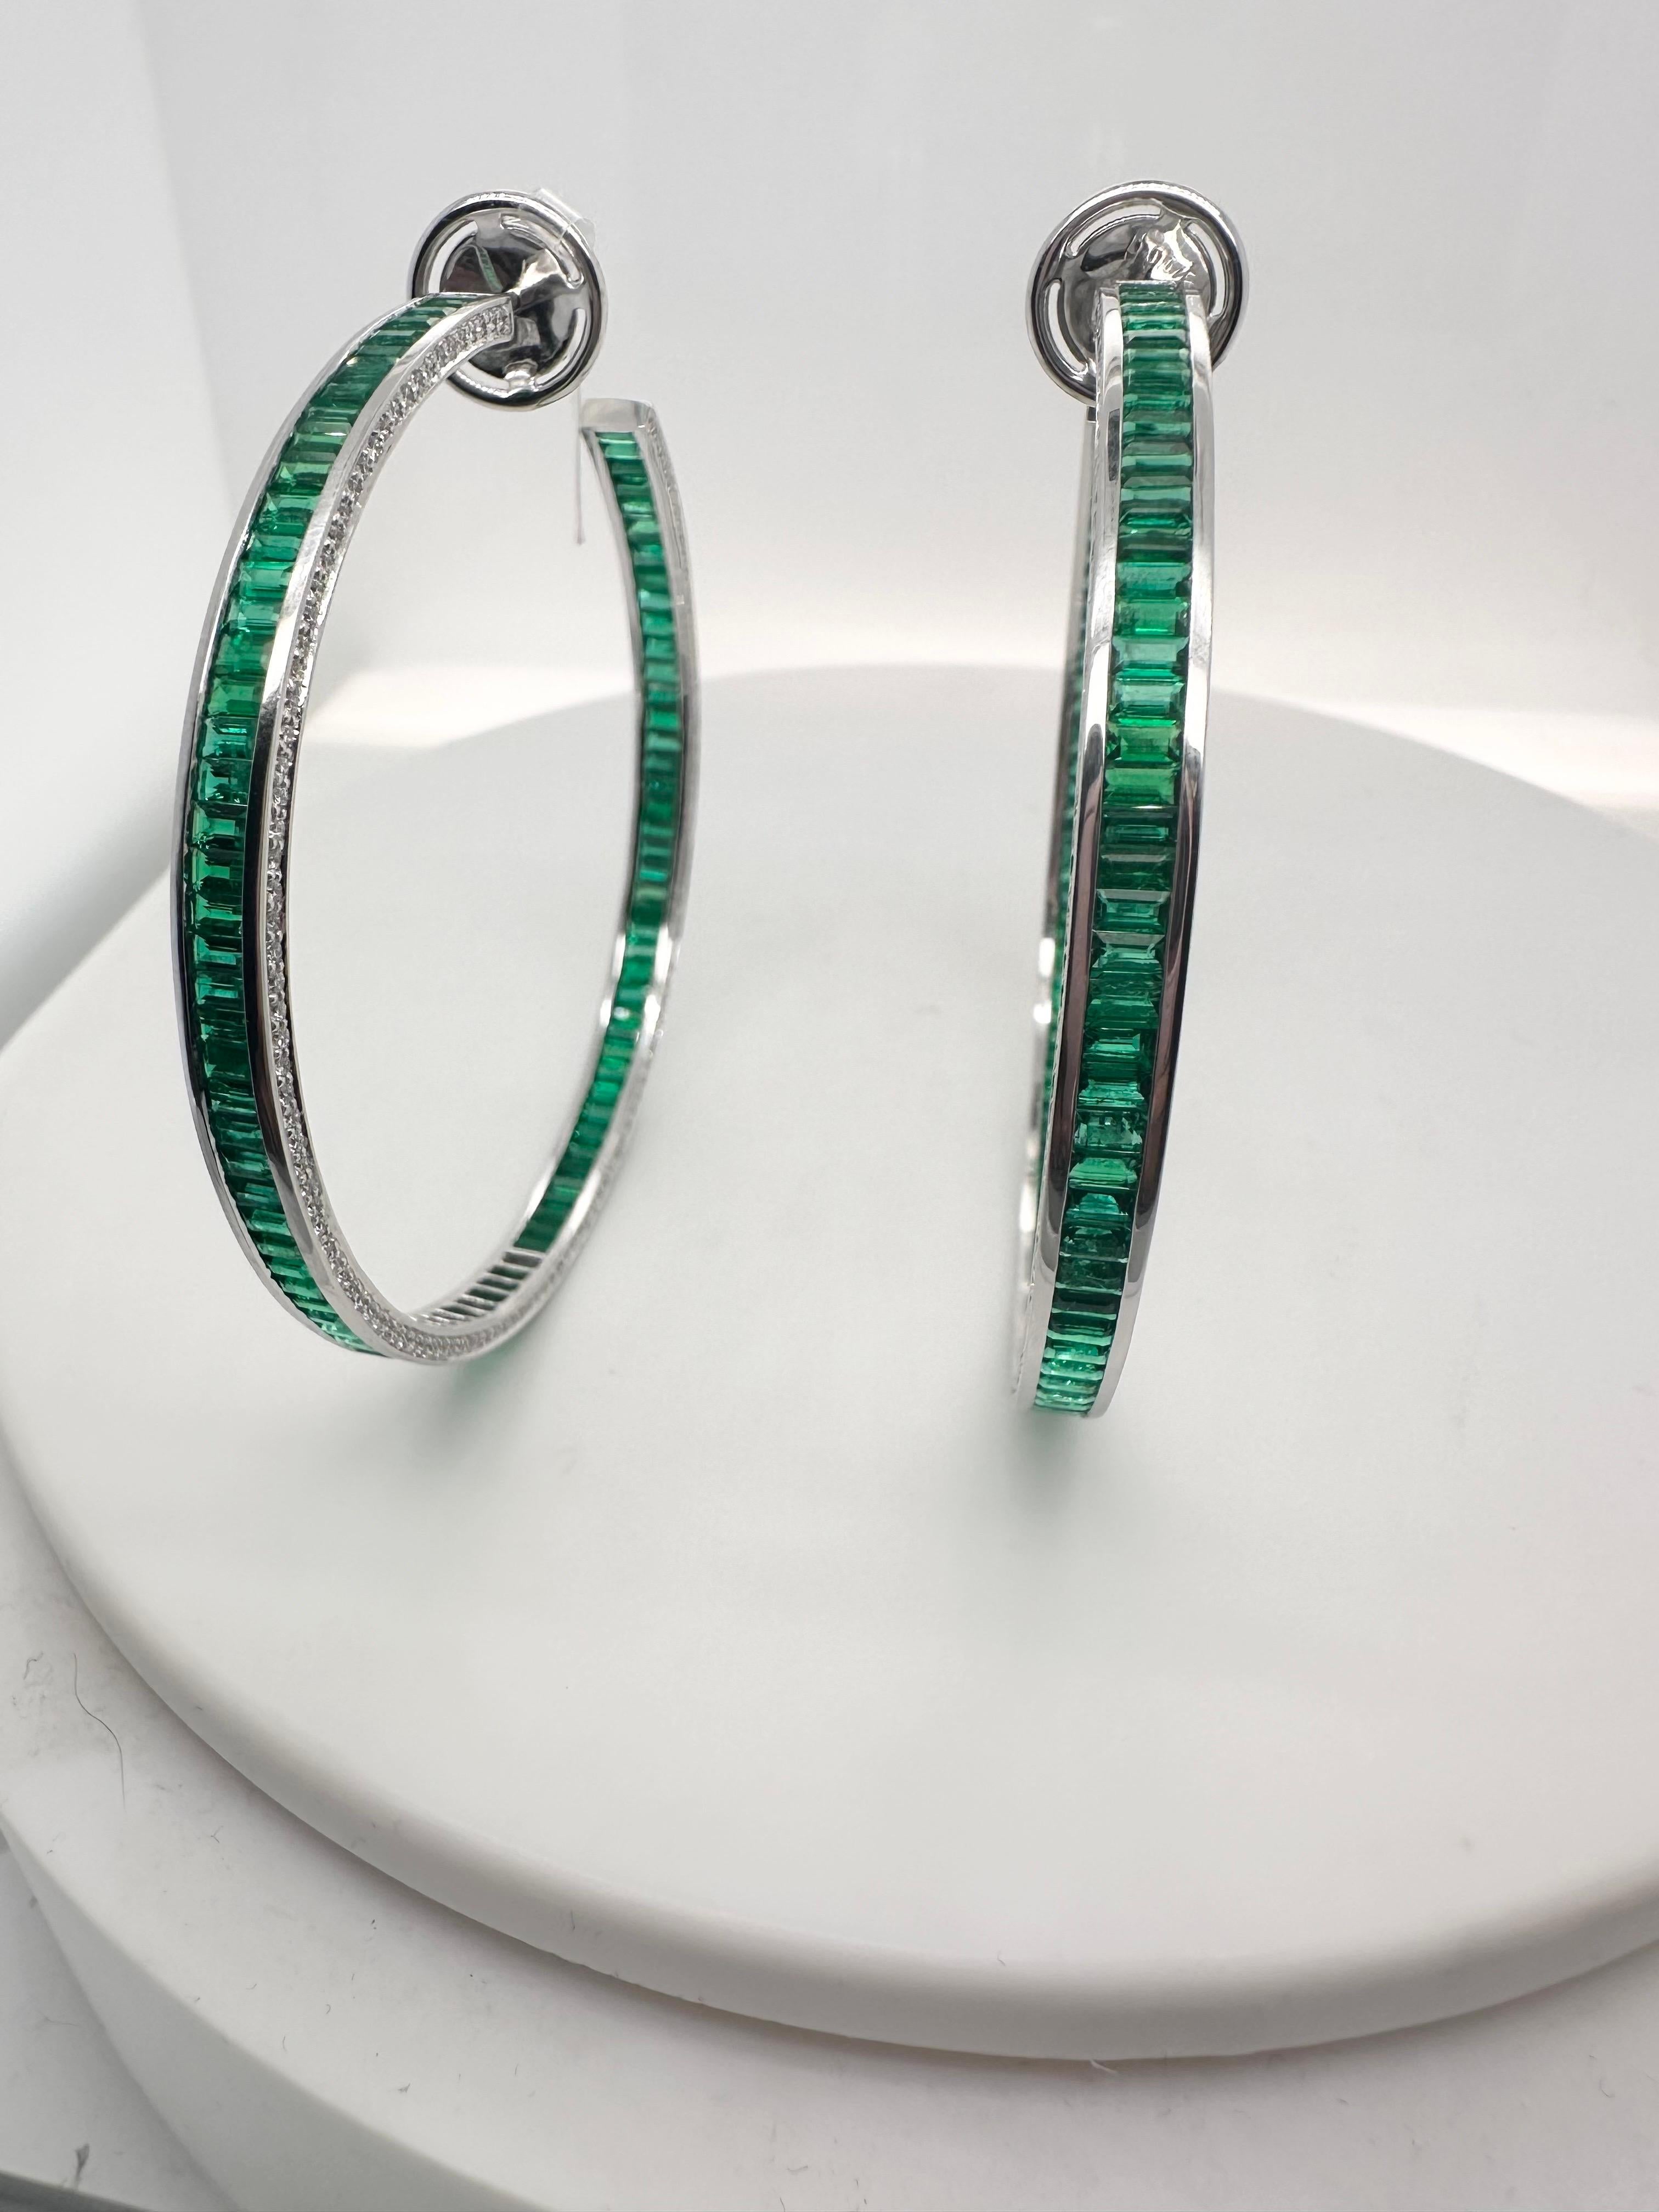 Exquisite earrings made with so many details and exceptional craftsmanship, Colombian emeralds, fine quality green emeralds with natural fine diamonds in a fancy hoop design! Even the butterfly has diamonds! These earrings are super rare as they